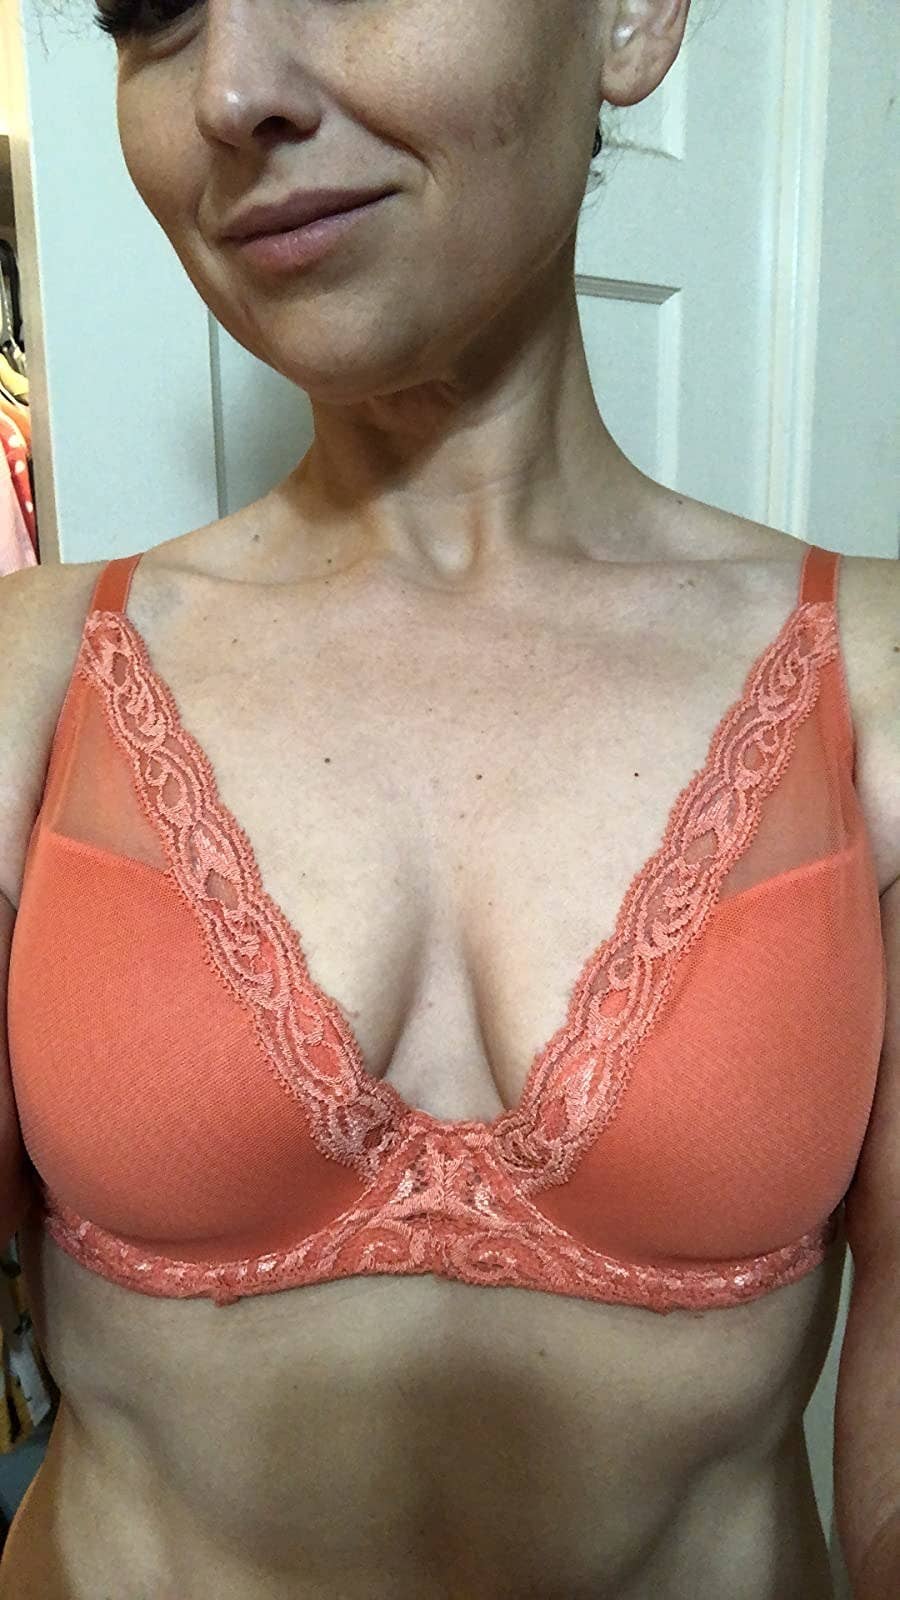 If You're In Need Of A New Bra, Here Are 24 Truly Excellent